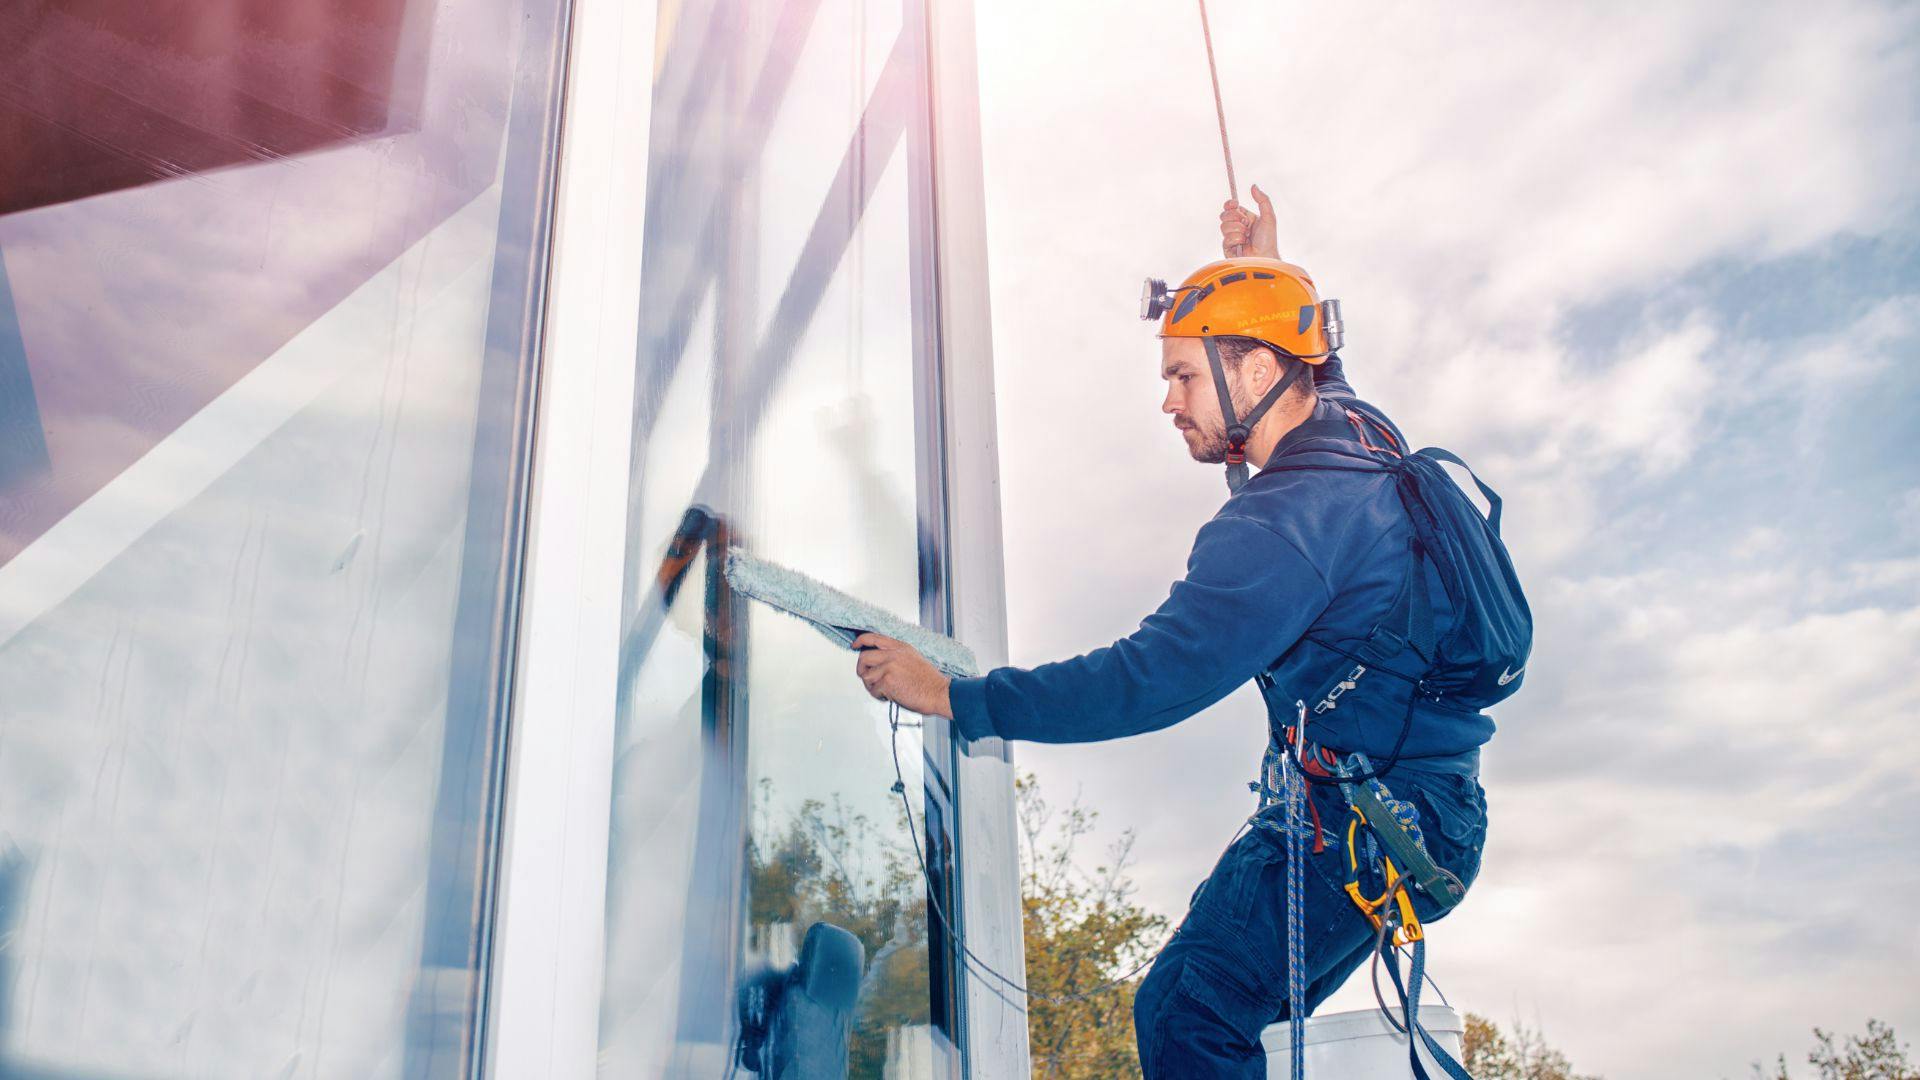 Professional window washer cleaning windows in a harness